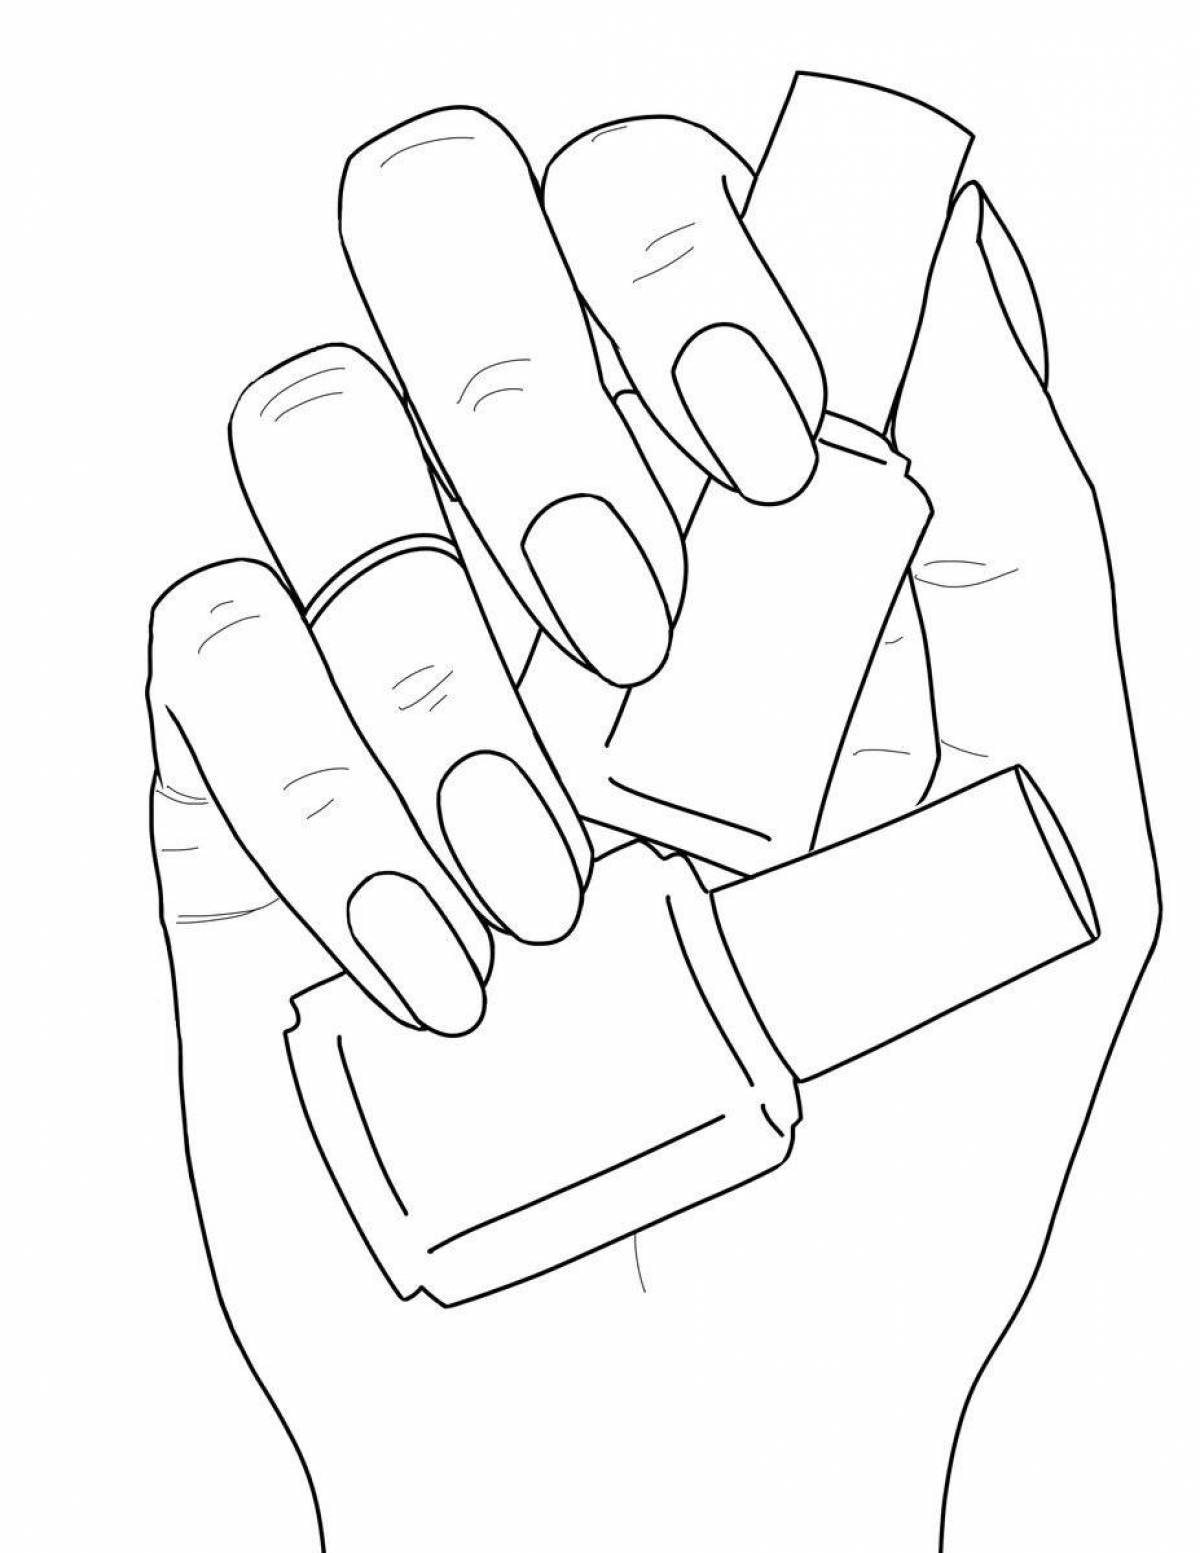 Coloring book bold hand with nails